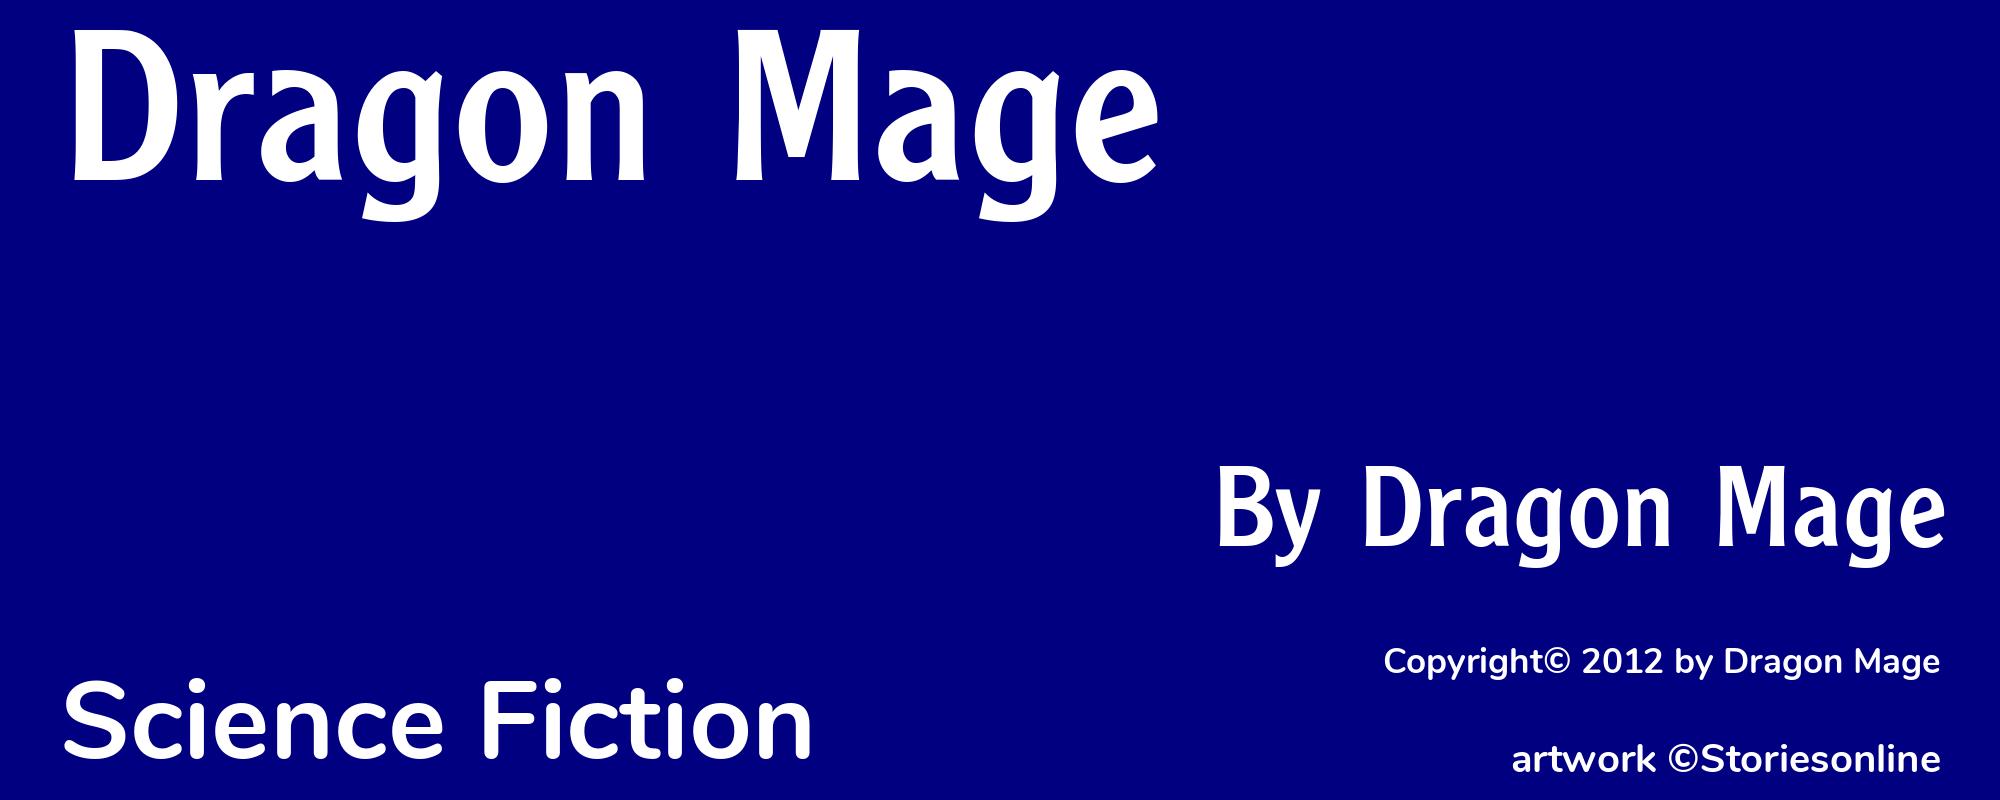 Dragon Mage - Cover